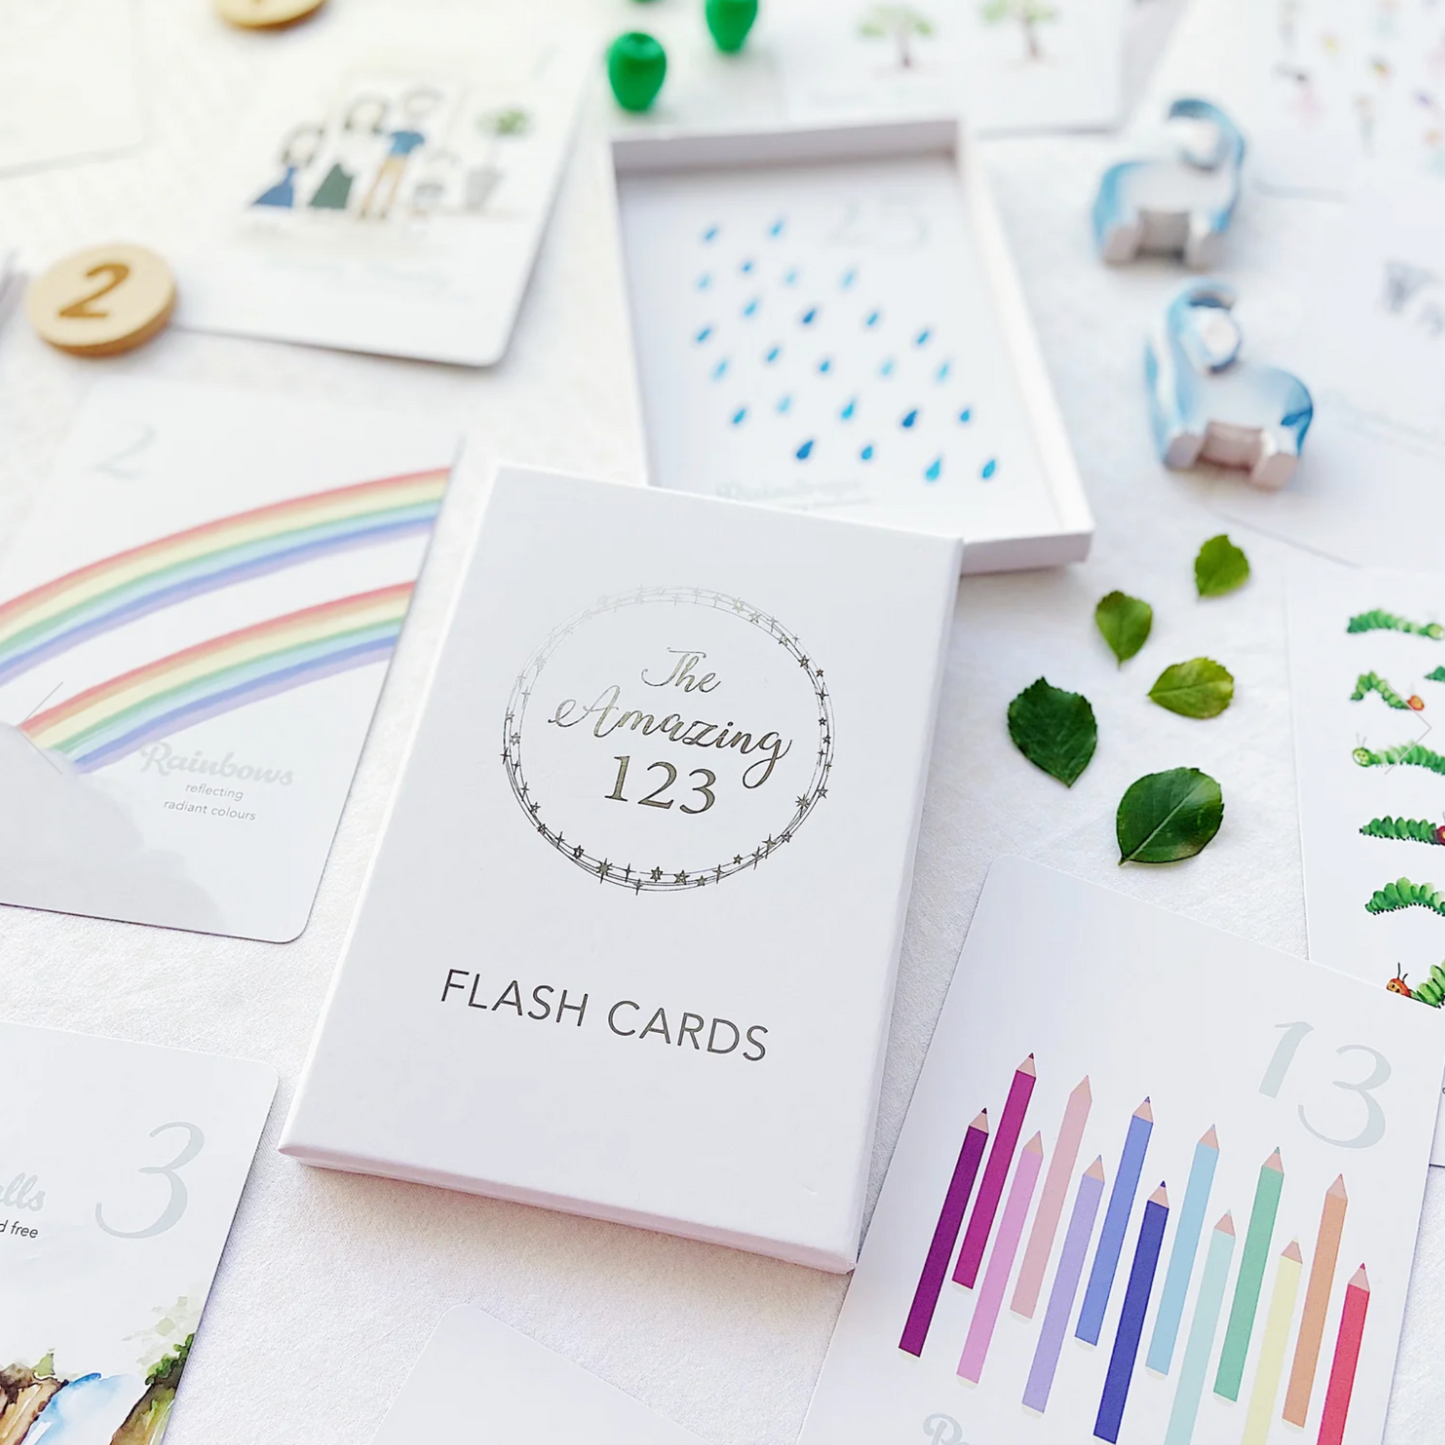 ADORED ILLUSTRATIONS - The Amazing 123 Flash Cards